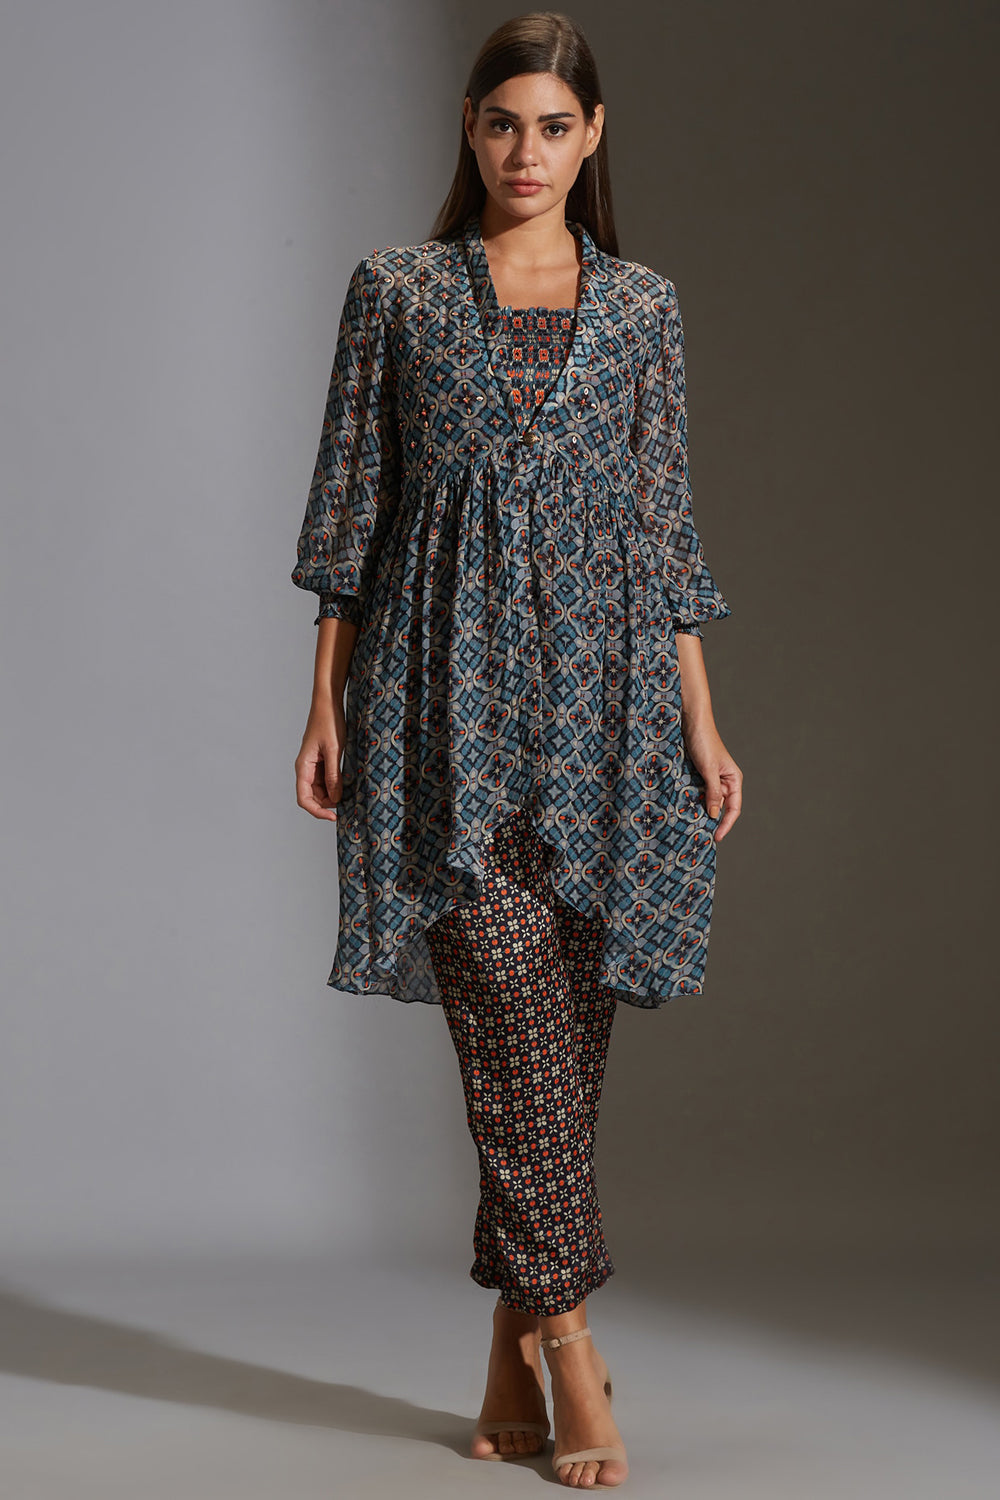 Arabesque Geometrical Print Pants With Rushed Top And Jacket